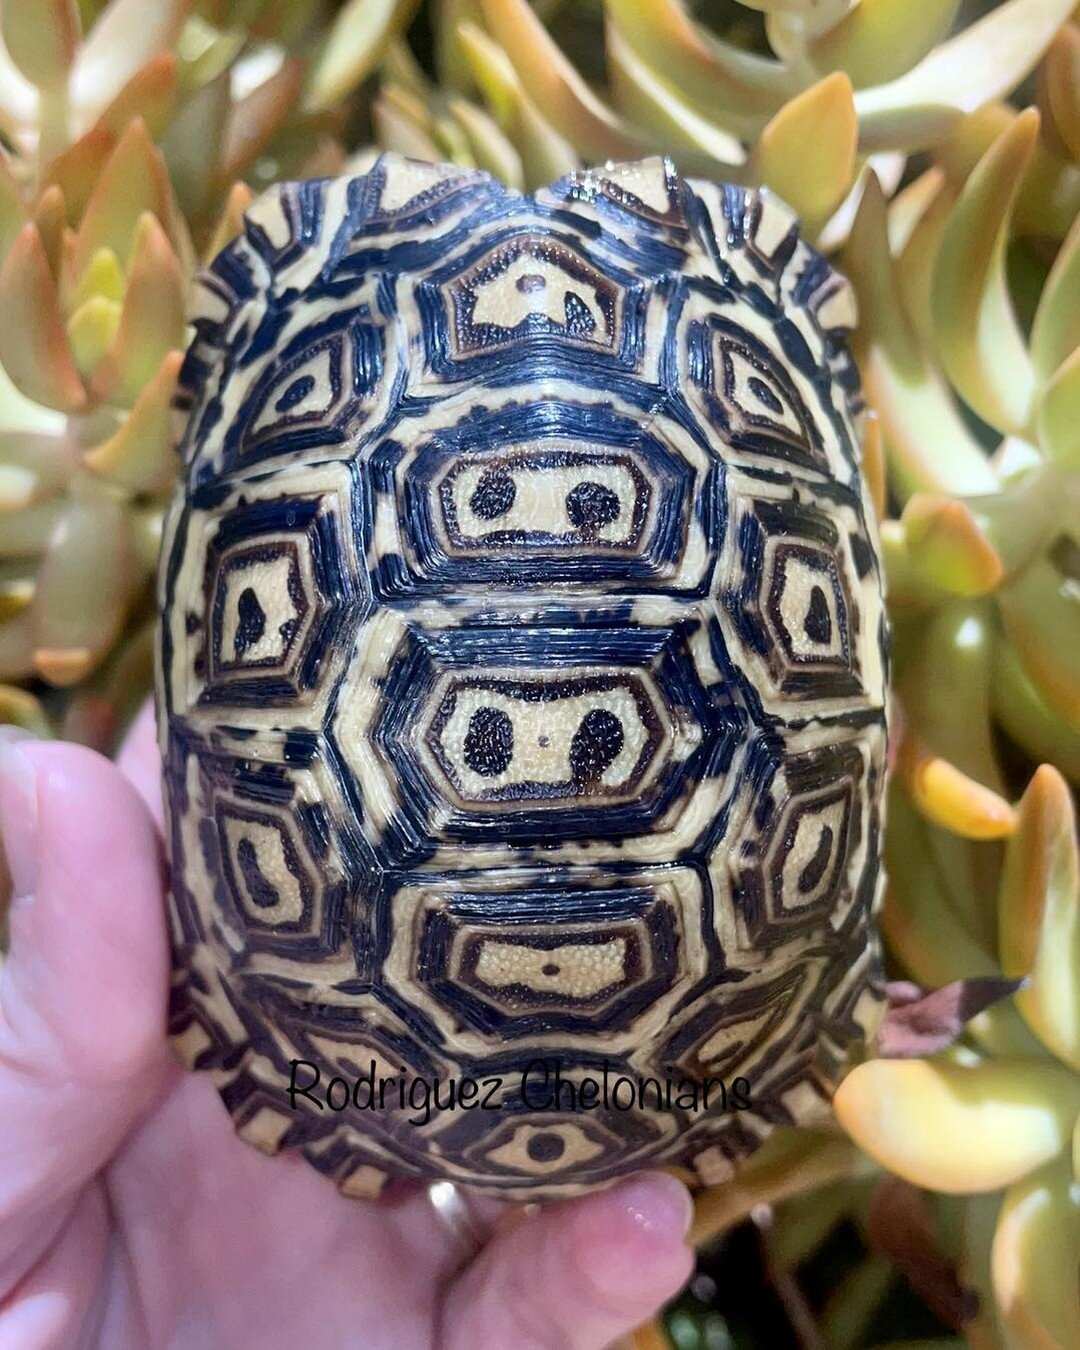 Just delivered another beauty to a happy owner!
*
*
*
#leopardtortoise #tortoise #stigmochelyspardalis #pardalispardalis #pardalis #southafrica #southafrican #purelocality #southafricanleopardtortoise #wellestablished #wellestablishedtortoise #rodrig